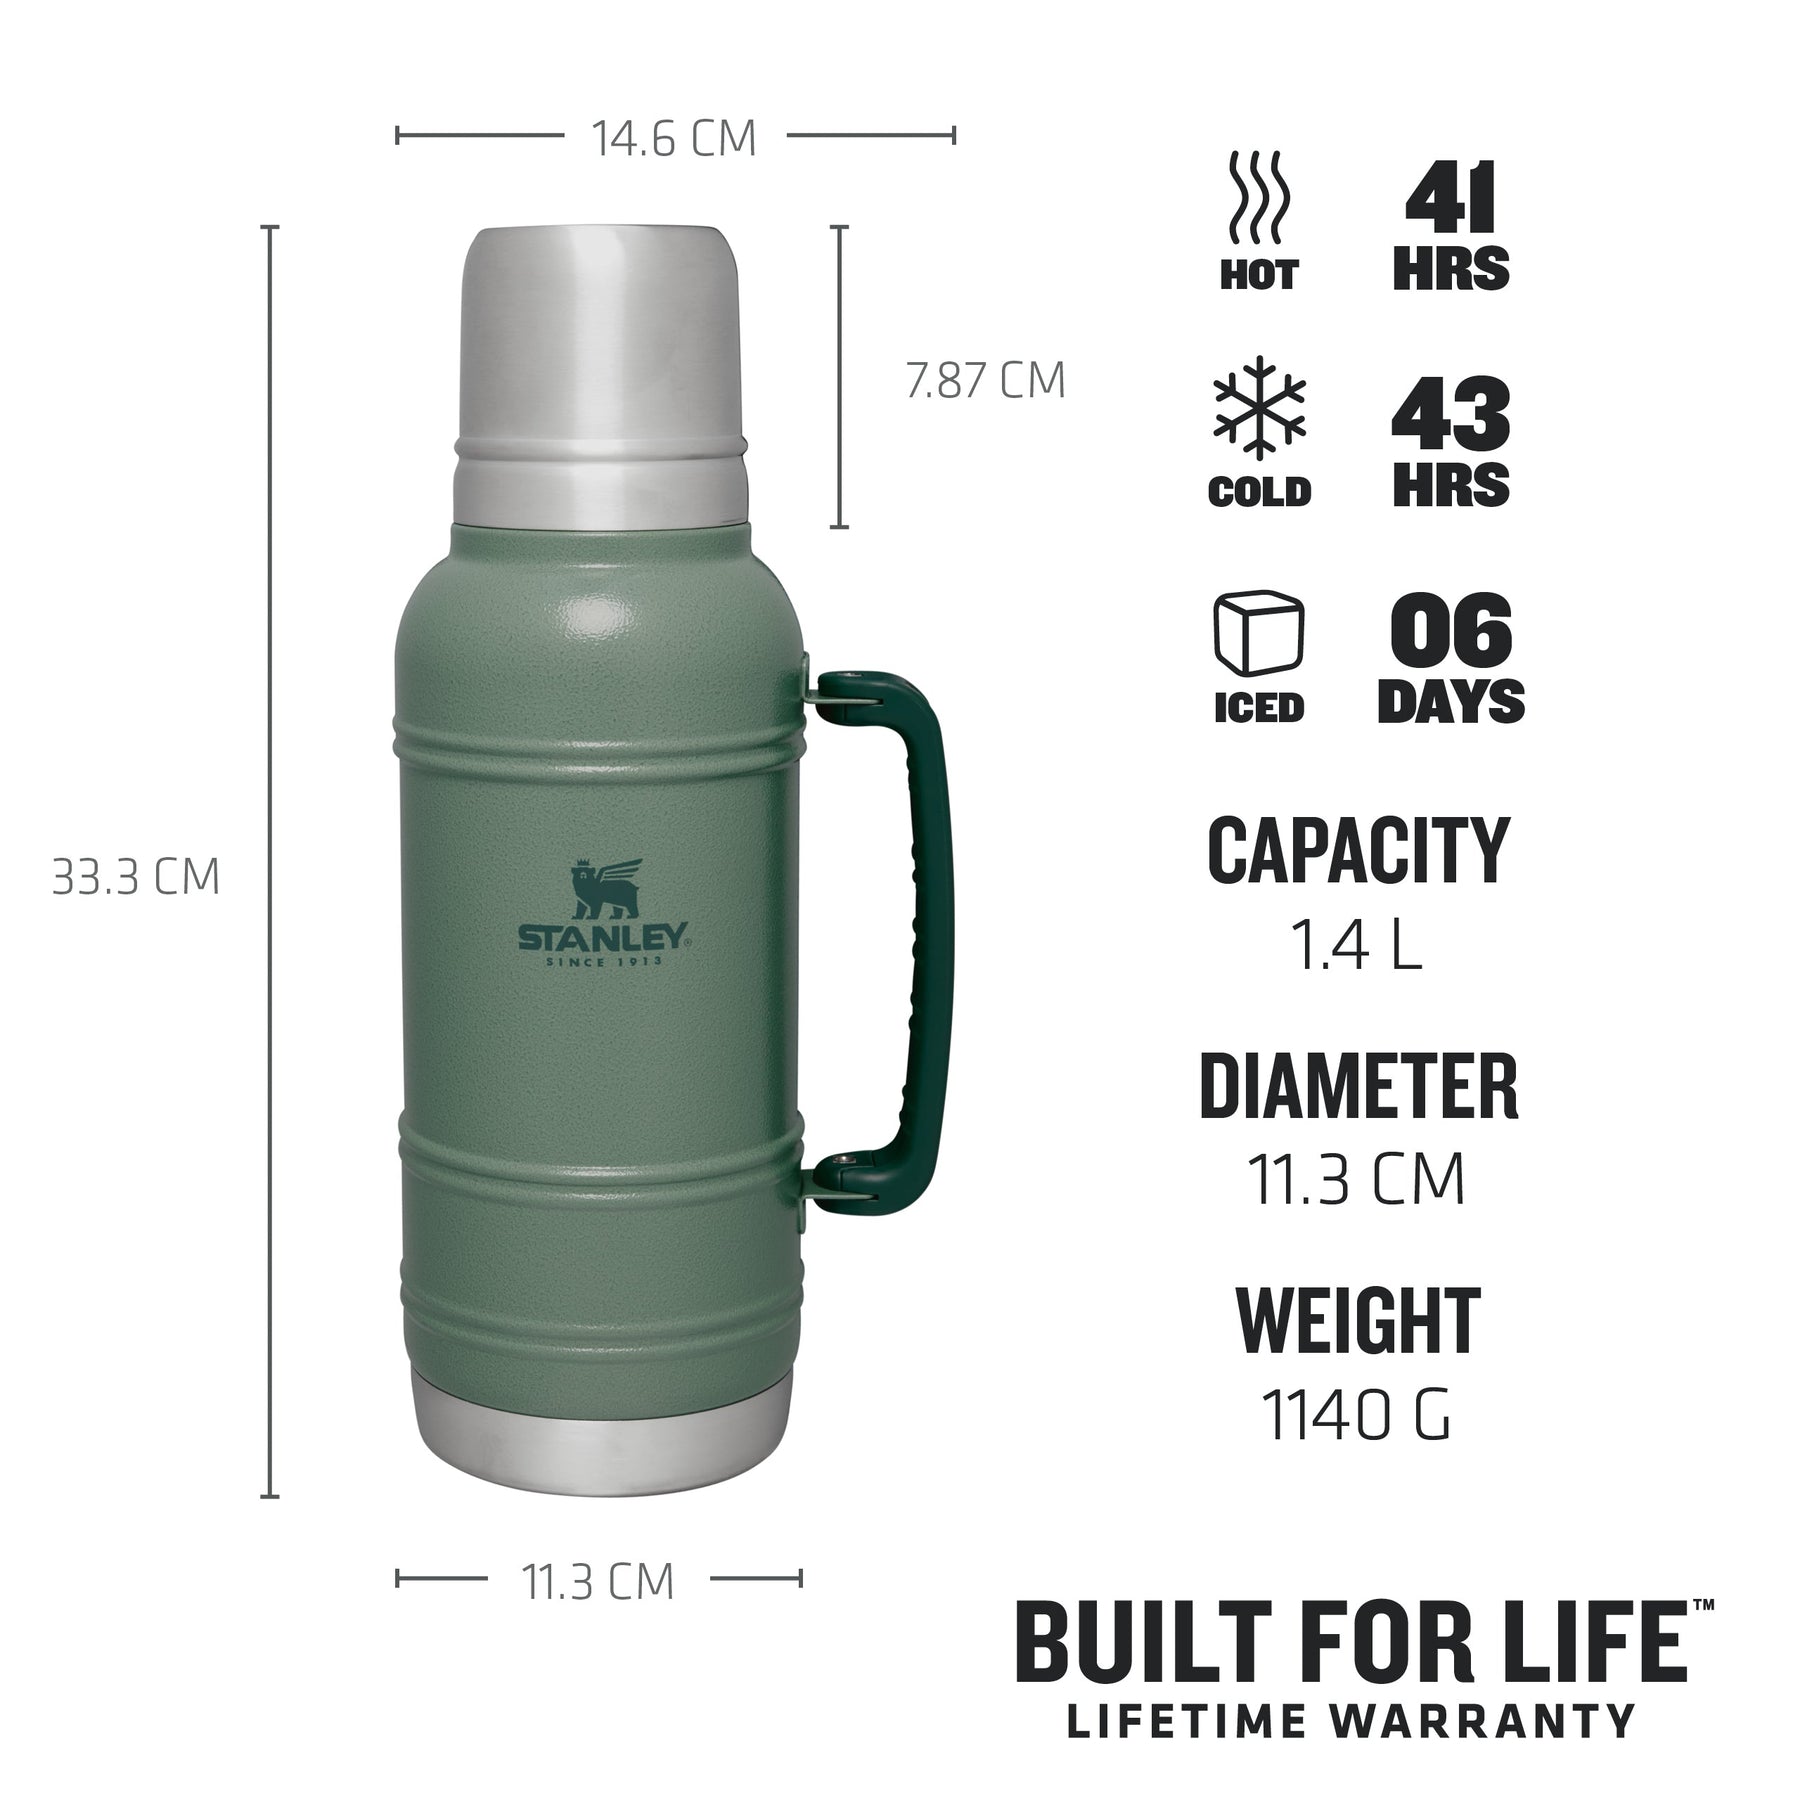  Stanley Classic Legendary Thermos Flask 2.3L - Keeps Hot or  Cold For 45 Hours - BPA-Free Thermal Flask - Stainless Steel Leakproof  Coffee Flask - Flask For Hot Drink - Dishwasher